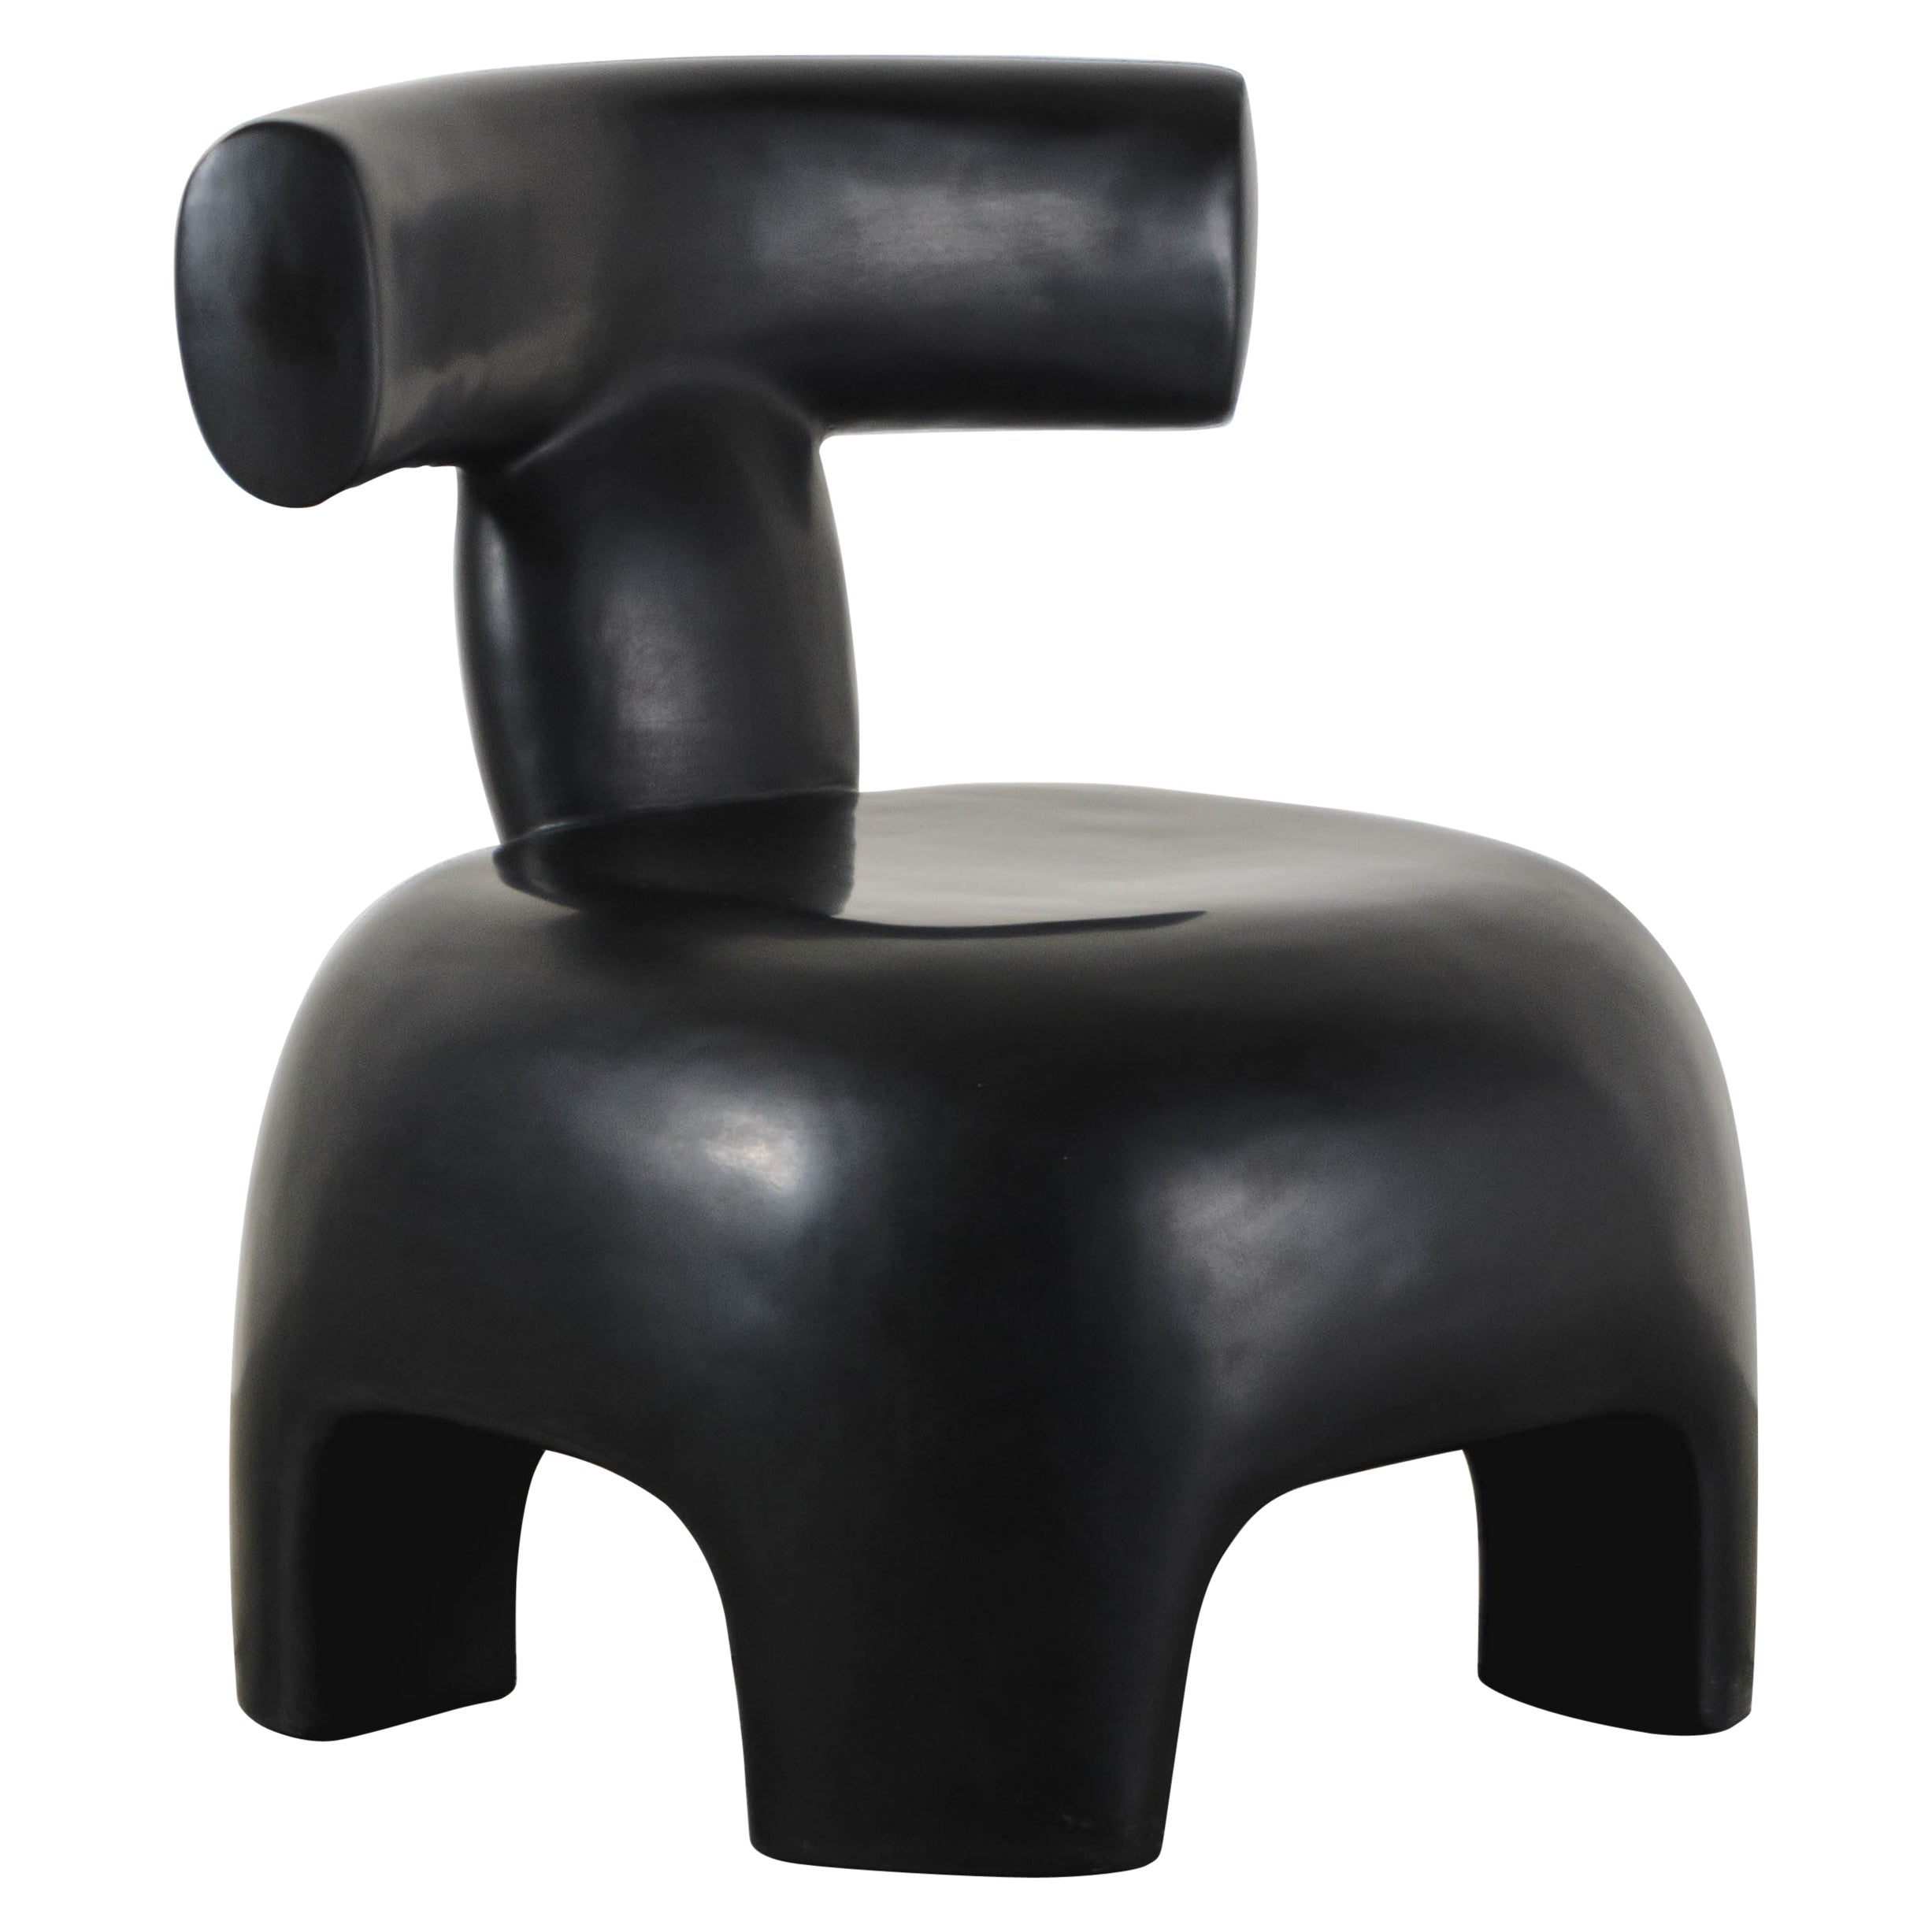 Back Rest Chair, Black Lacquer by Robert Kuo, Handmade, Limited Edition